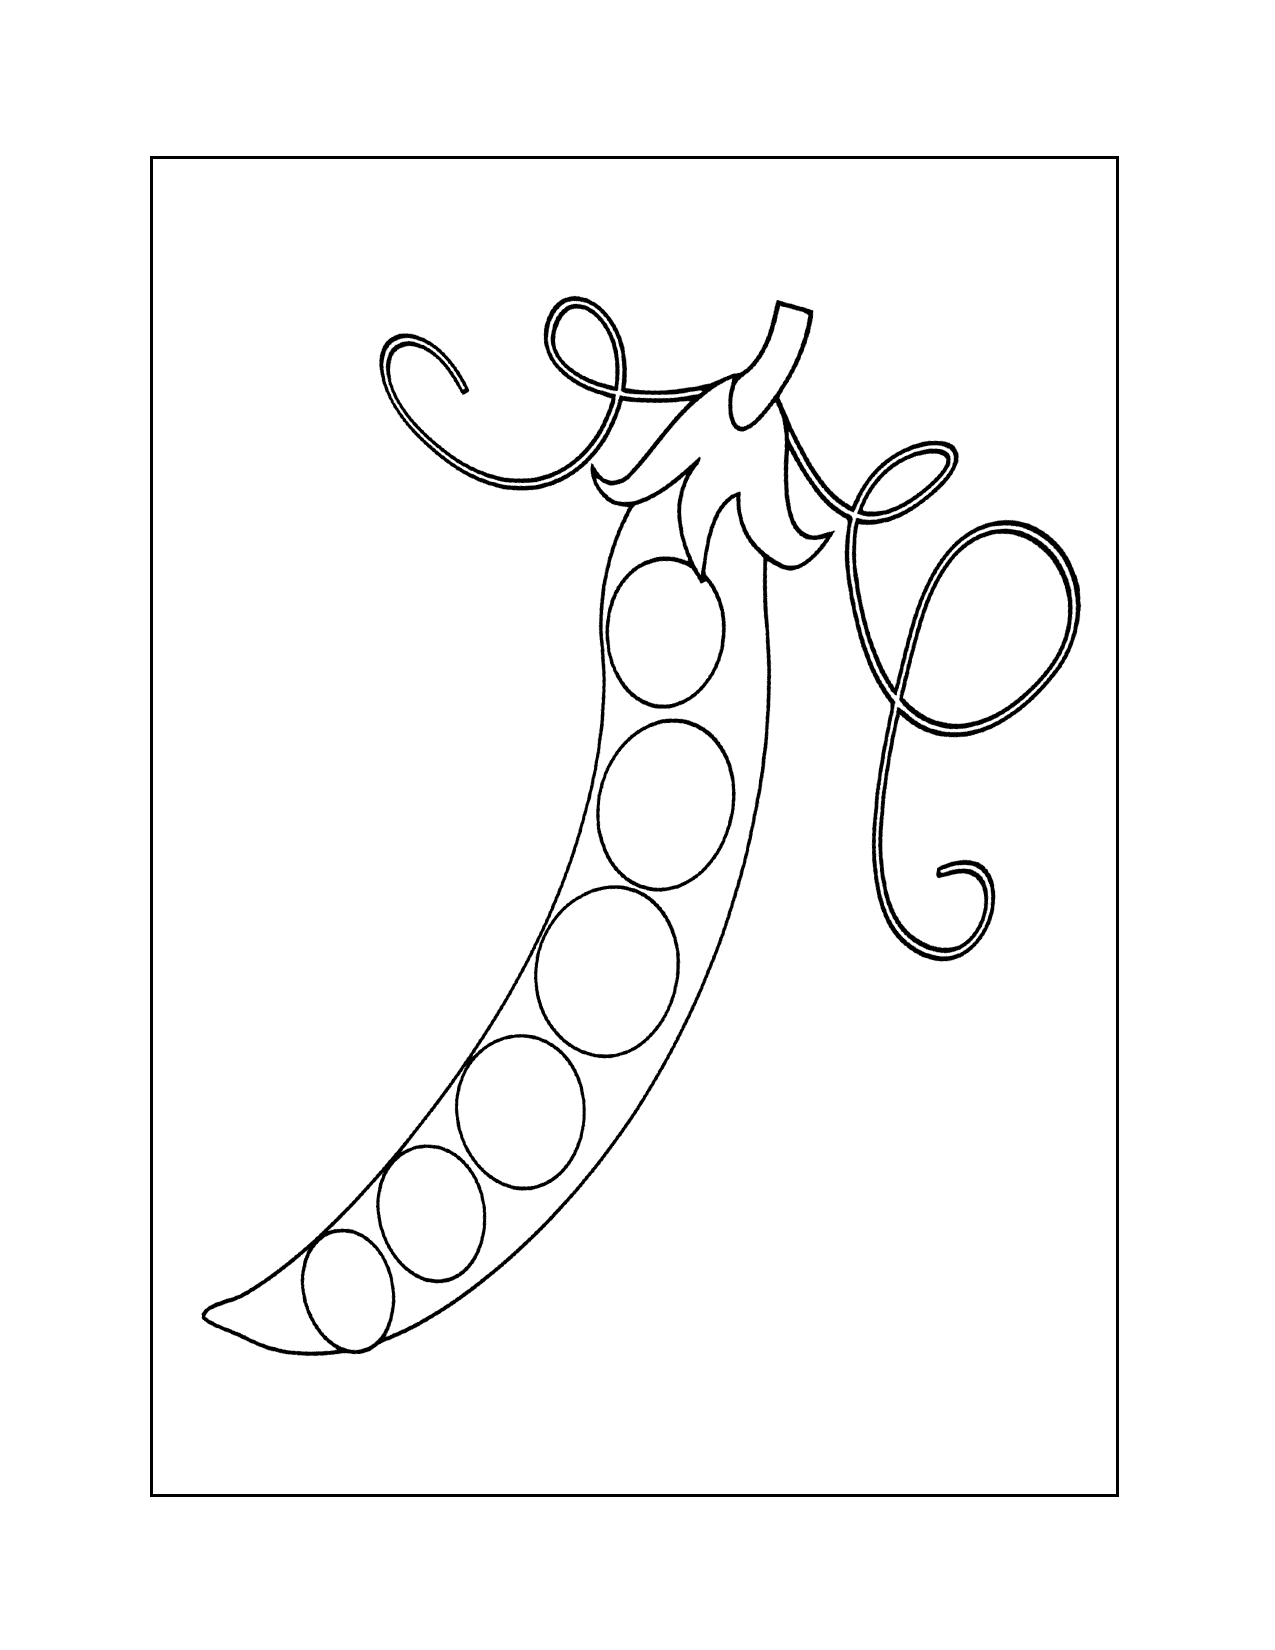 Easy Peas Coloring Page